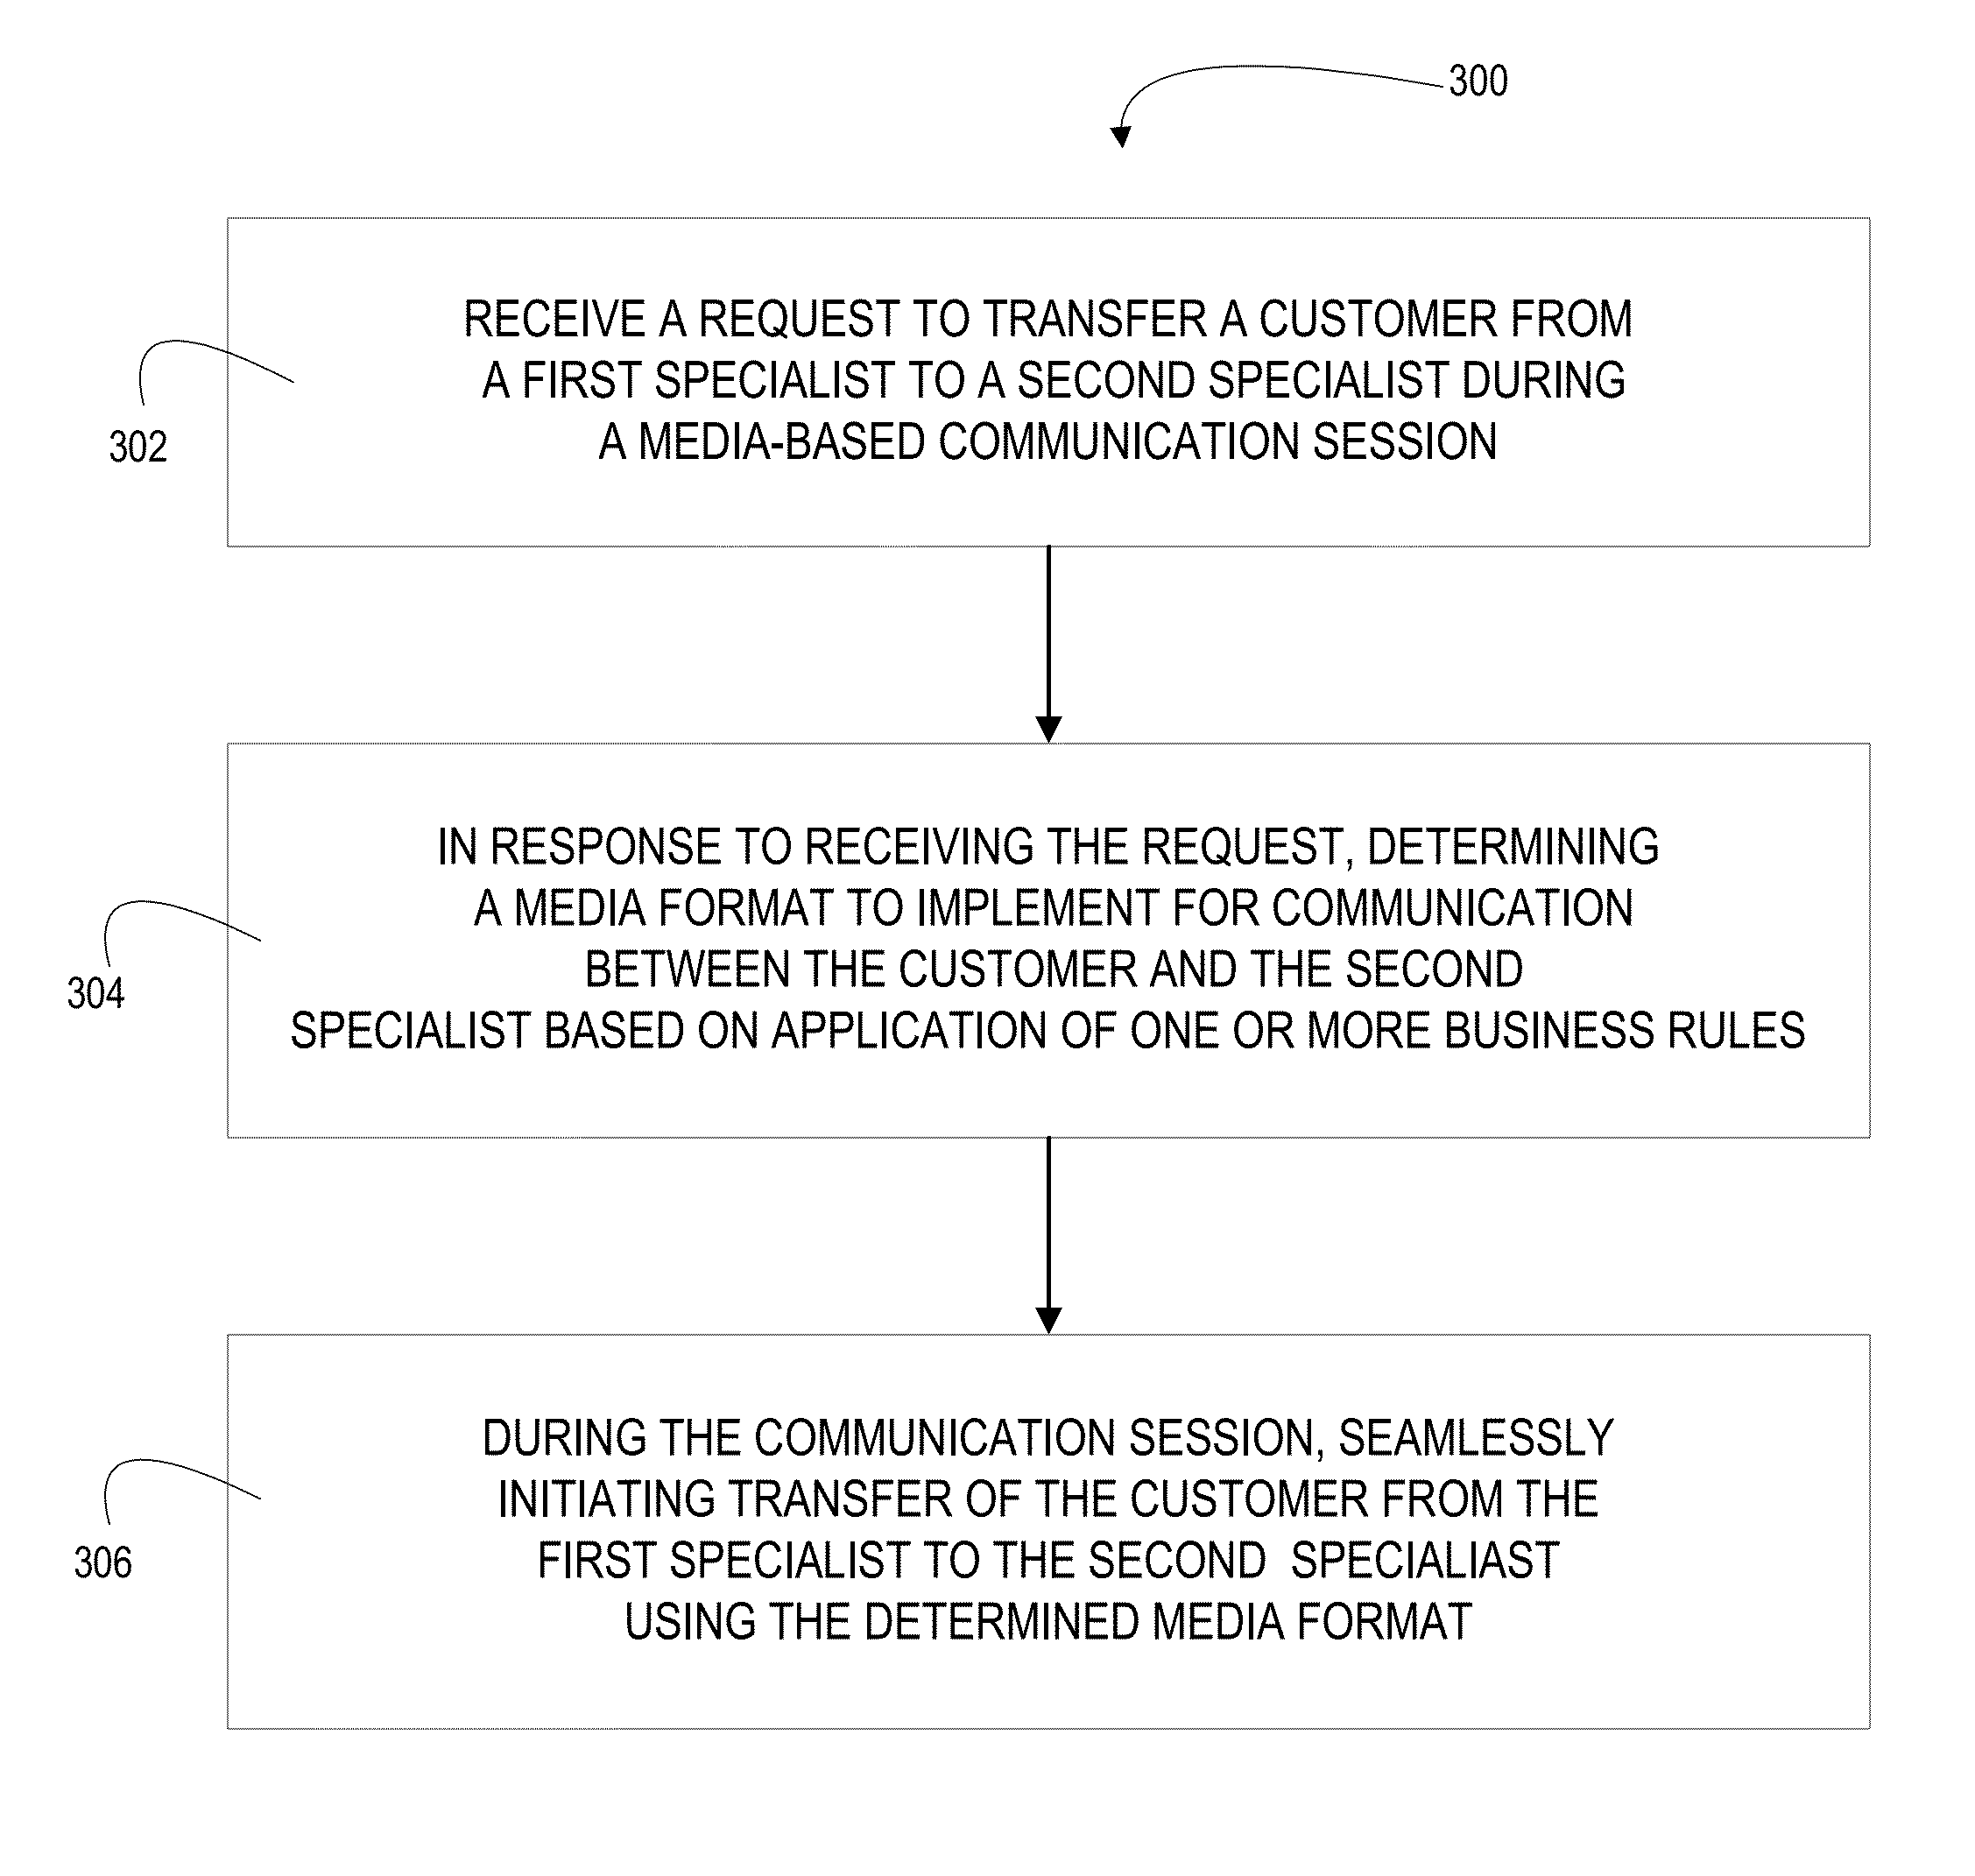 Determining electronic media format when transferring a customer between specialists or amongst communication sources at a customer service outlet